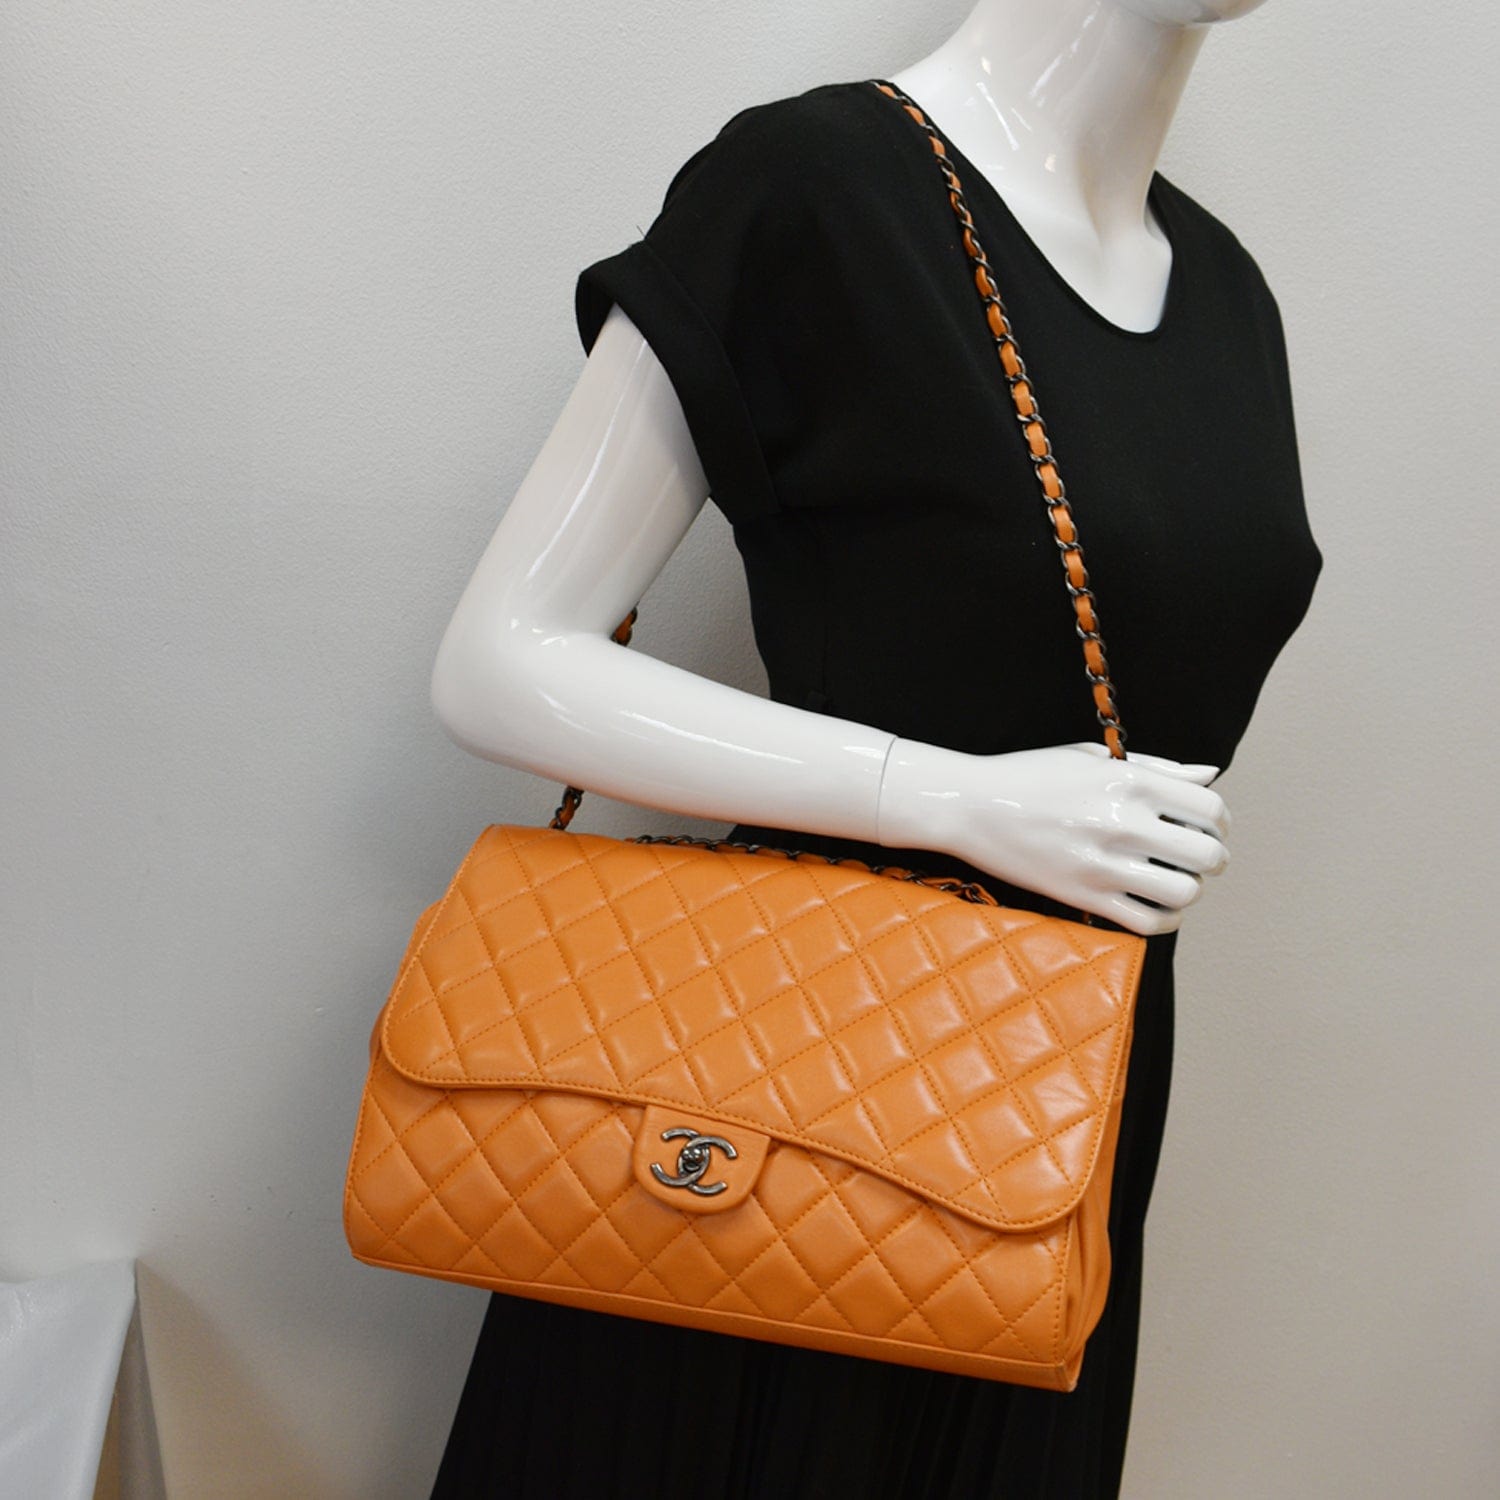 Pre-owned Chanel Orange Leather Mini Flap